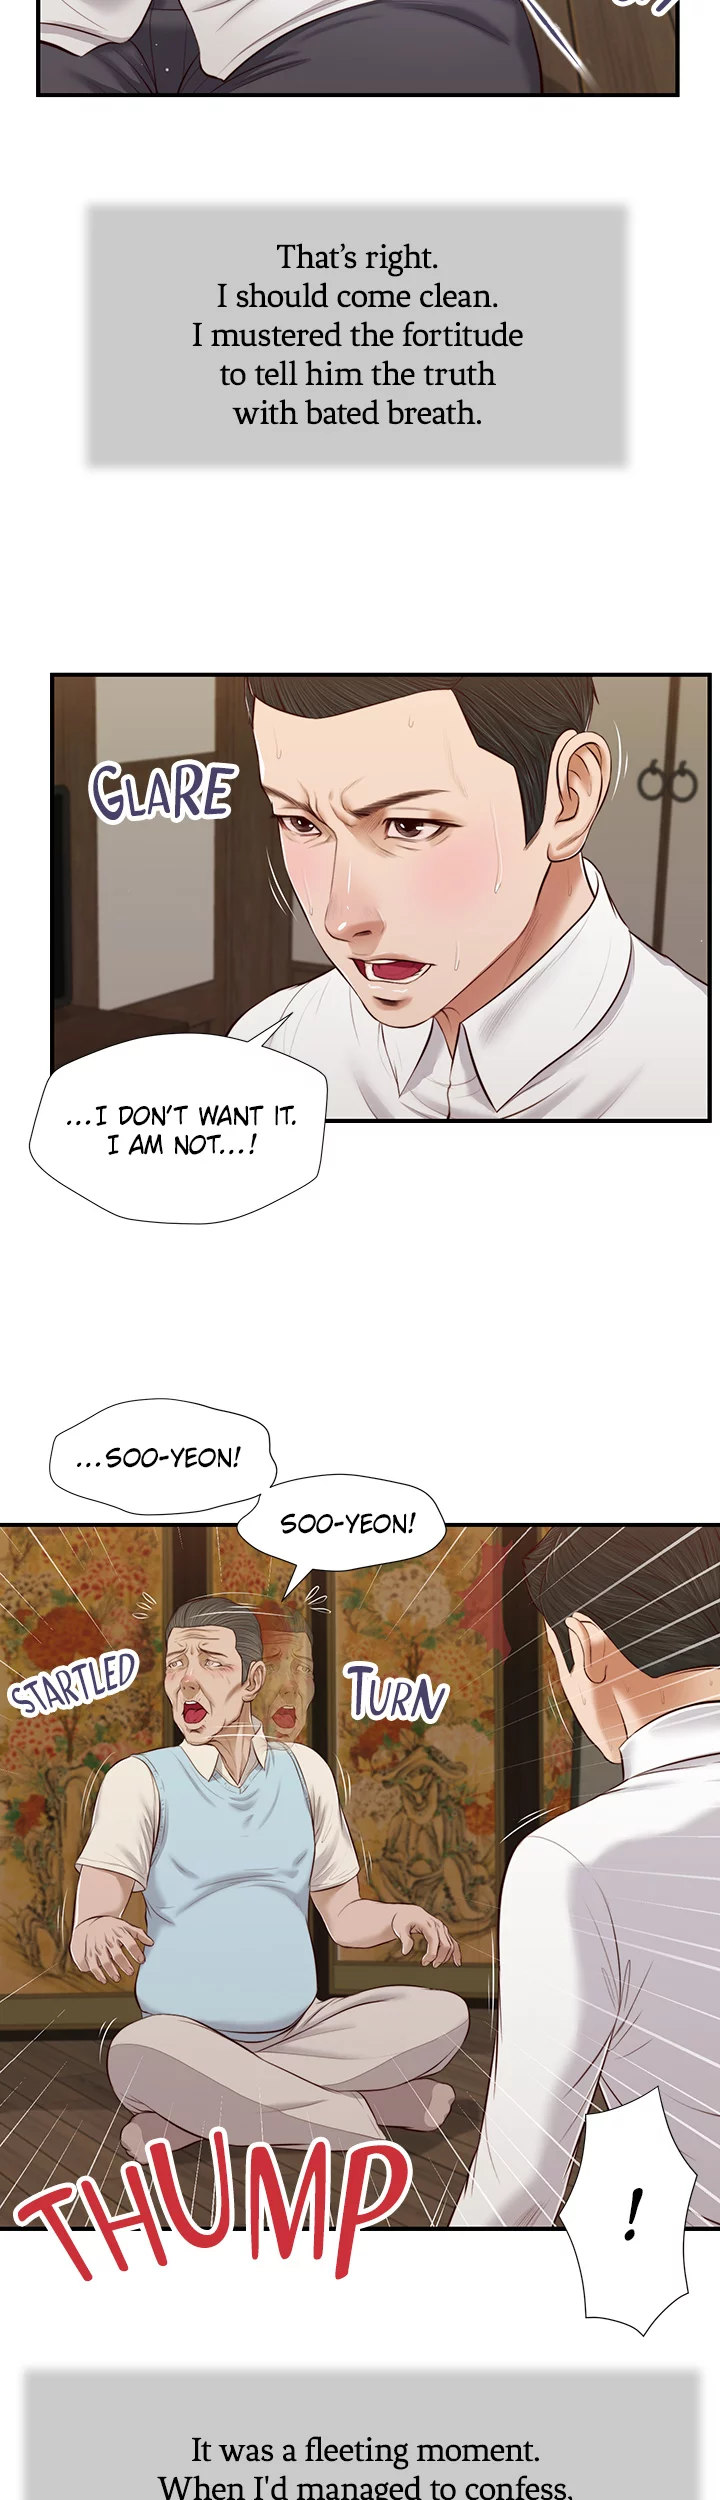 Concubine - Chapter 53 Page 10